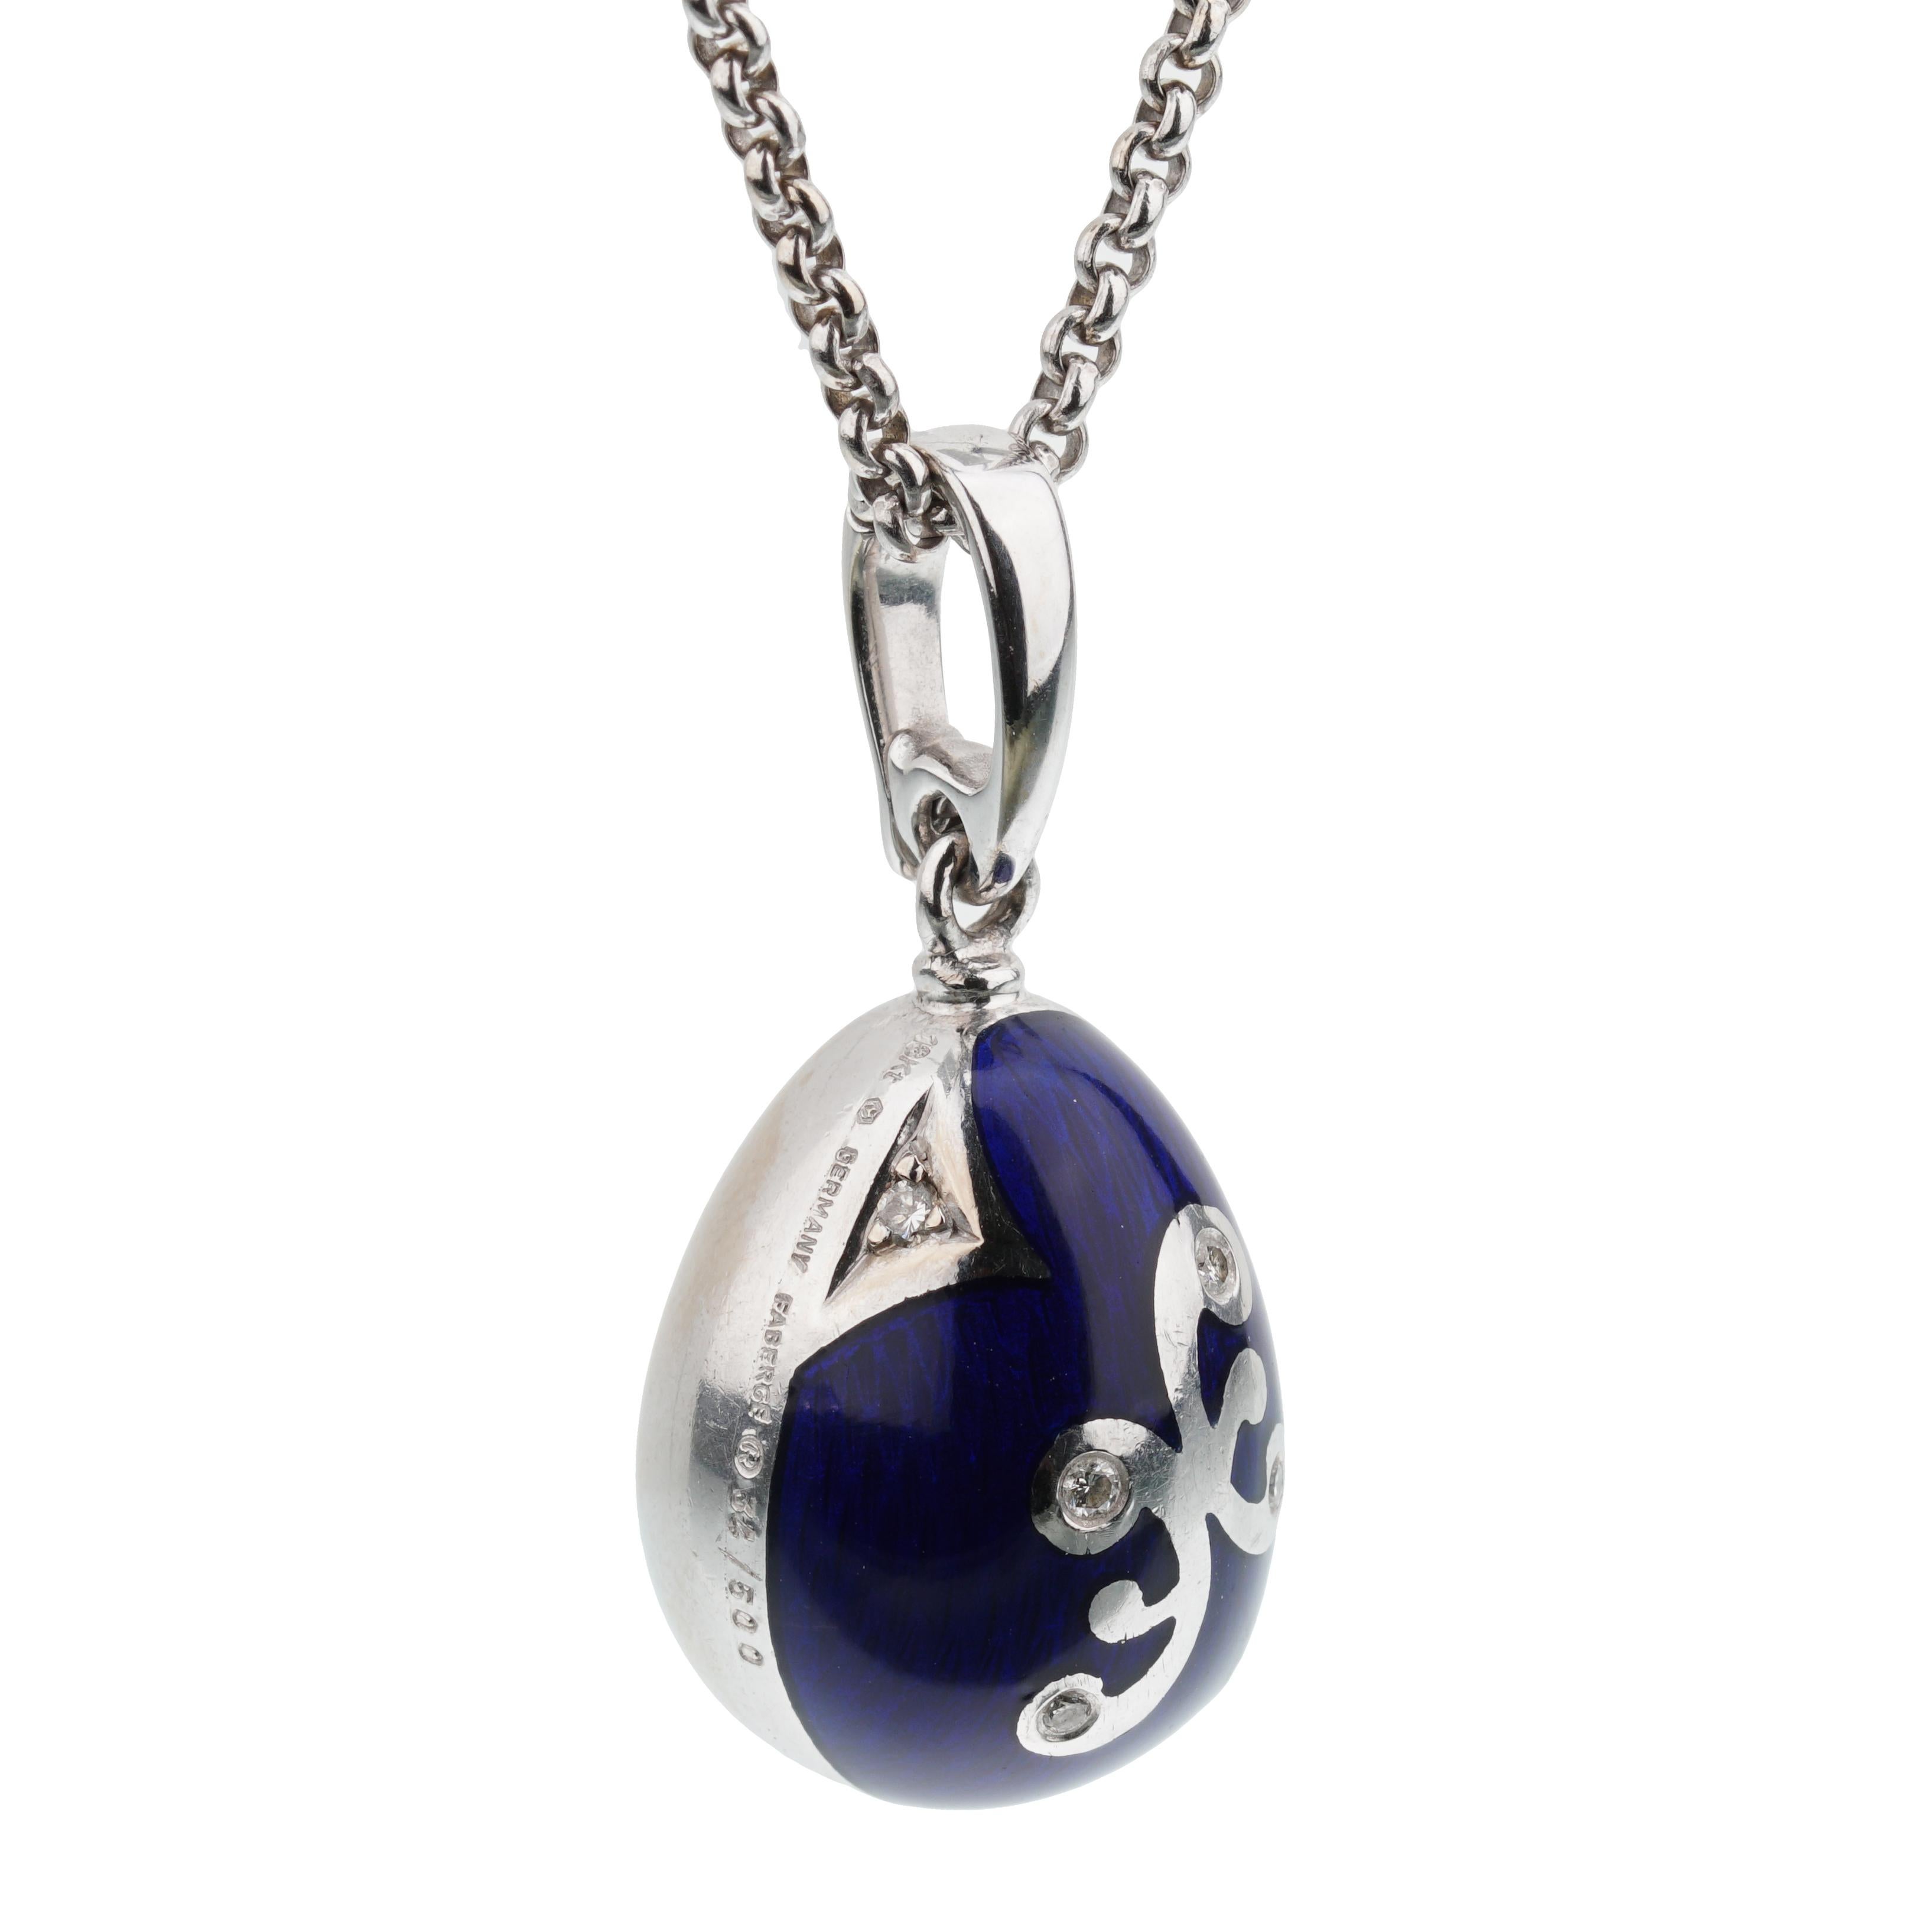 An amazing limited edition of 500 pieces Fabrege diamond pendant necklace showcasing blue enamel and white round brilliant cut diamonds set in 18k white gold.

